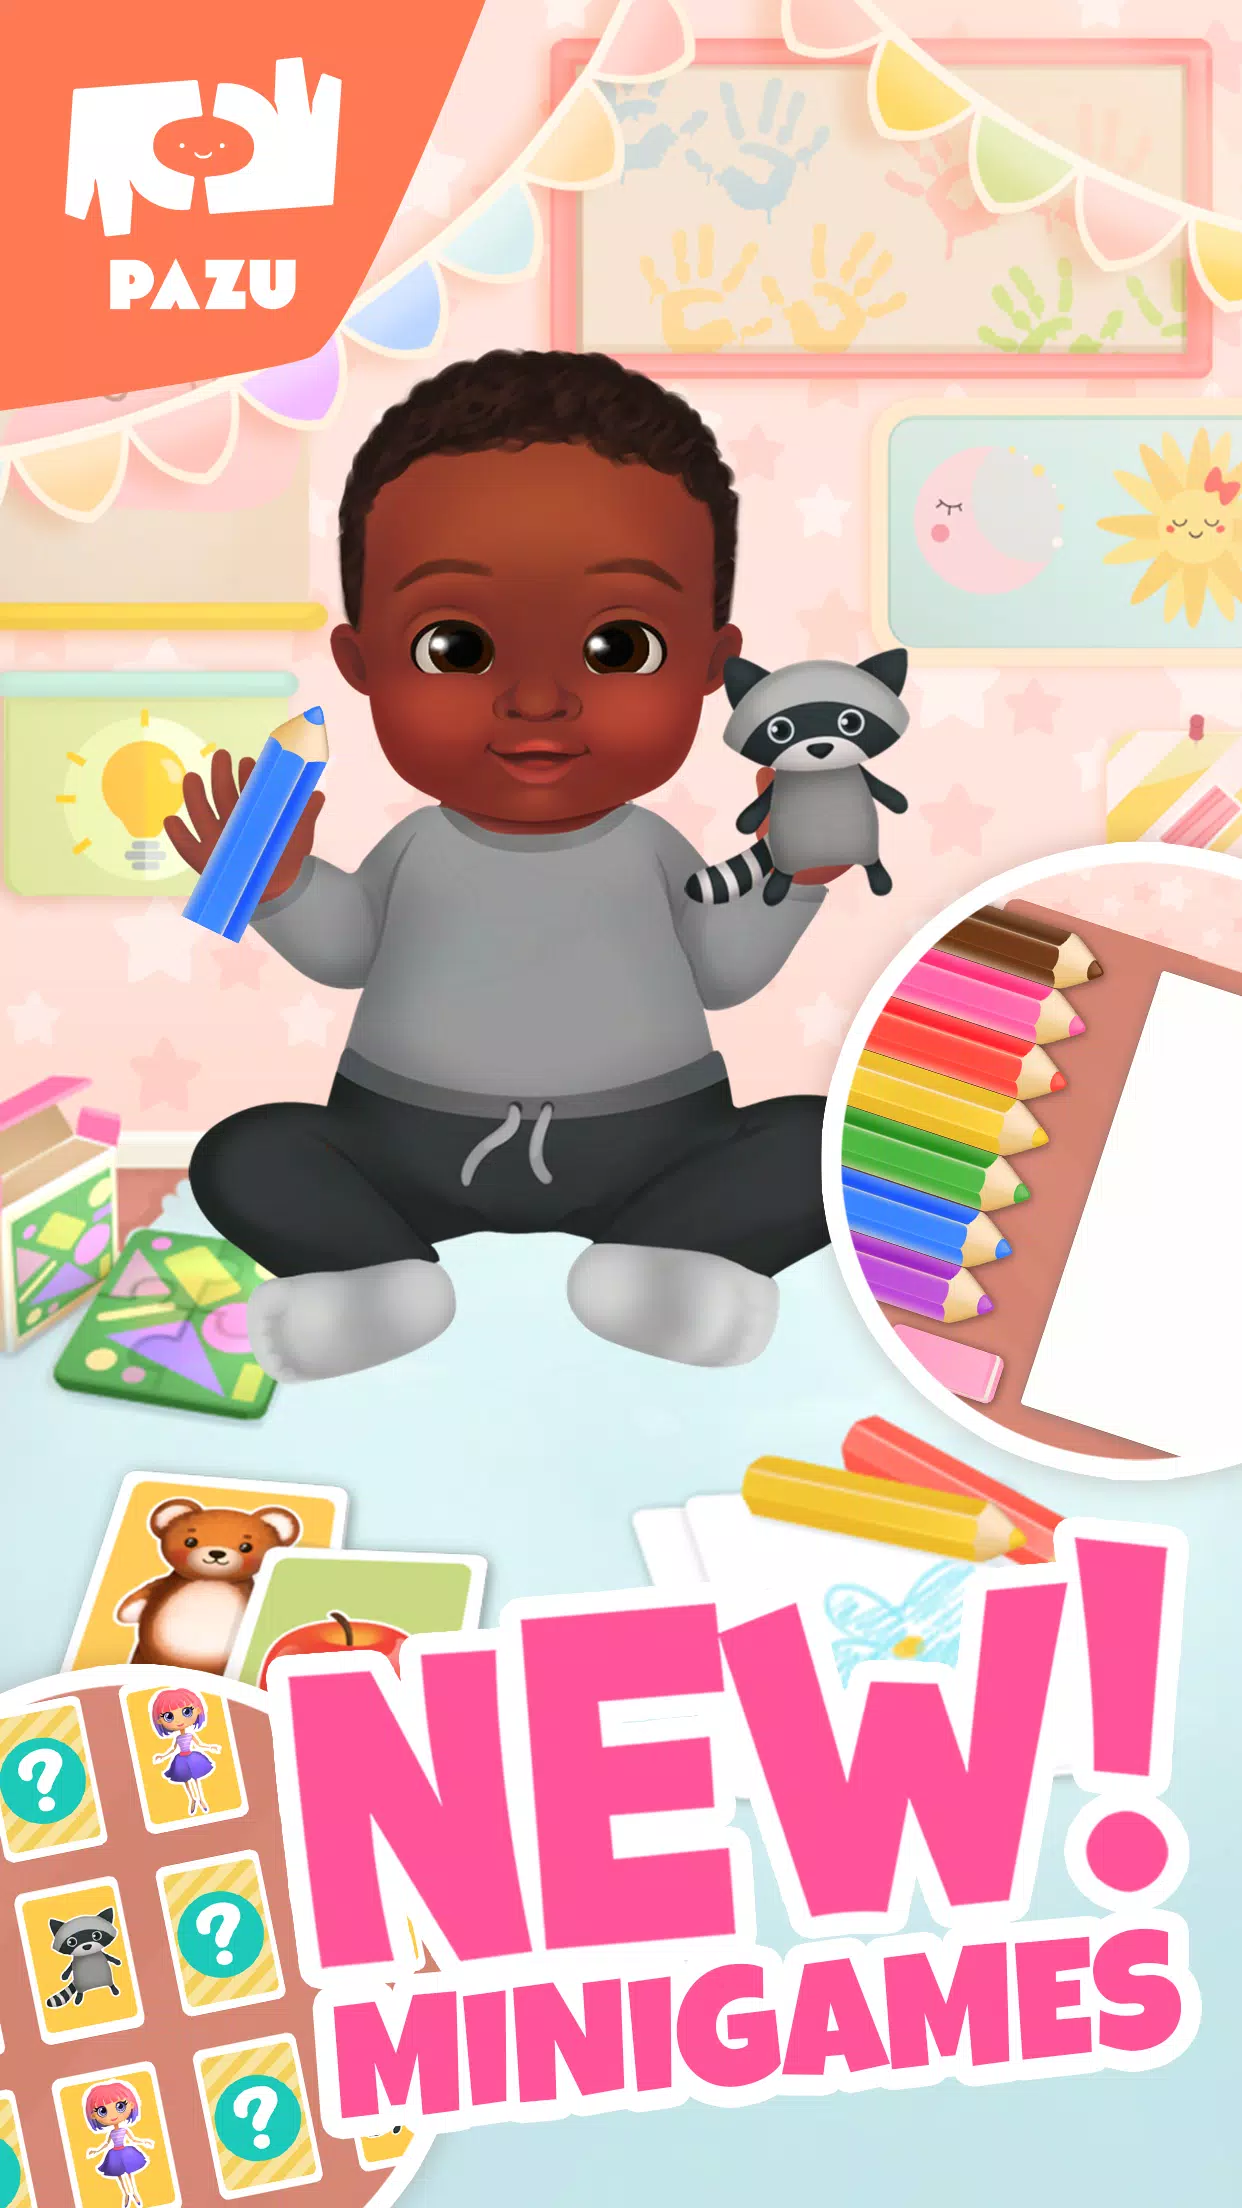 Baby Dress up Baby Care Games - Apps on Google Play